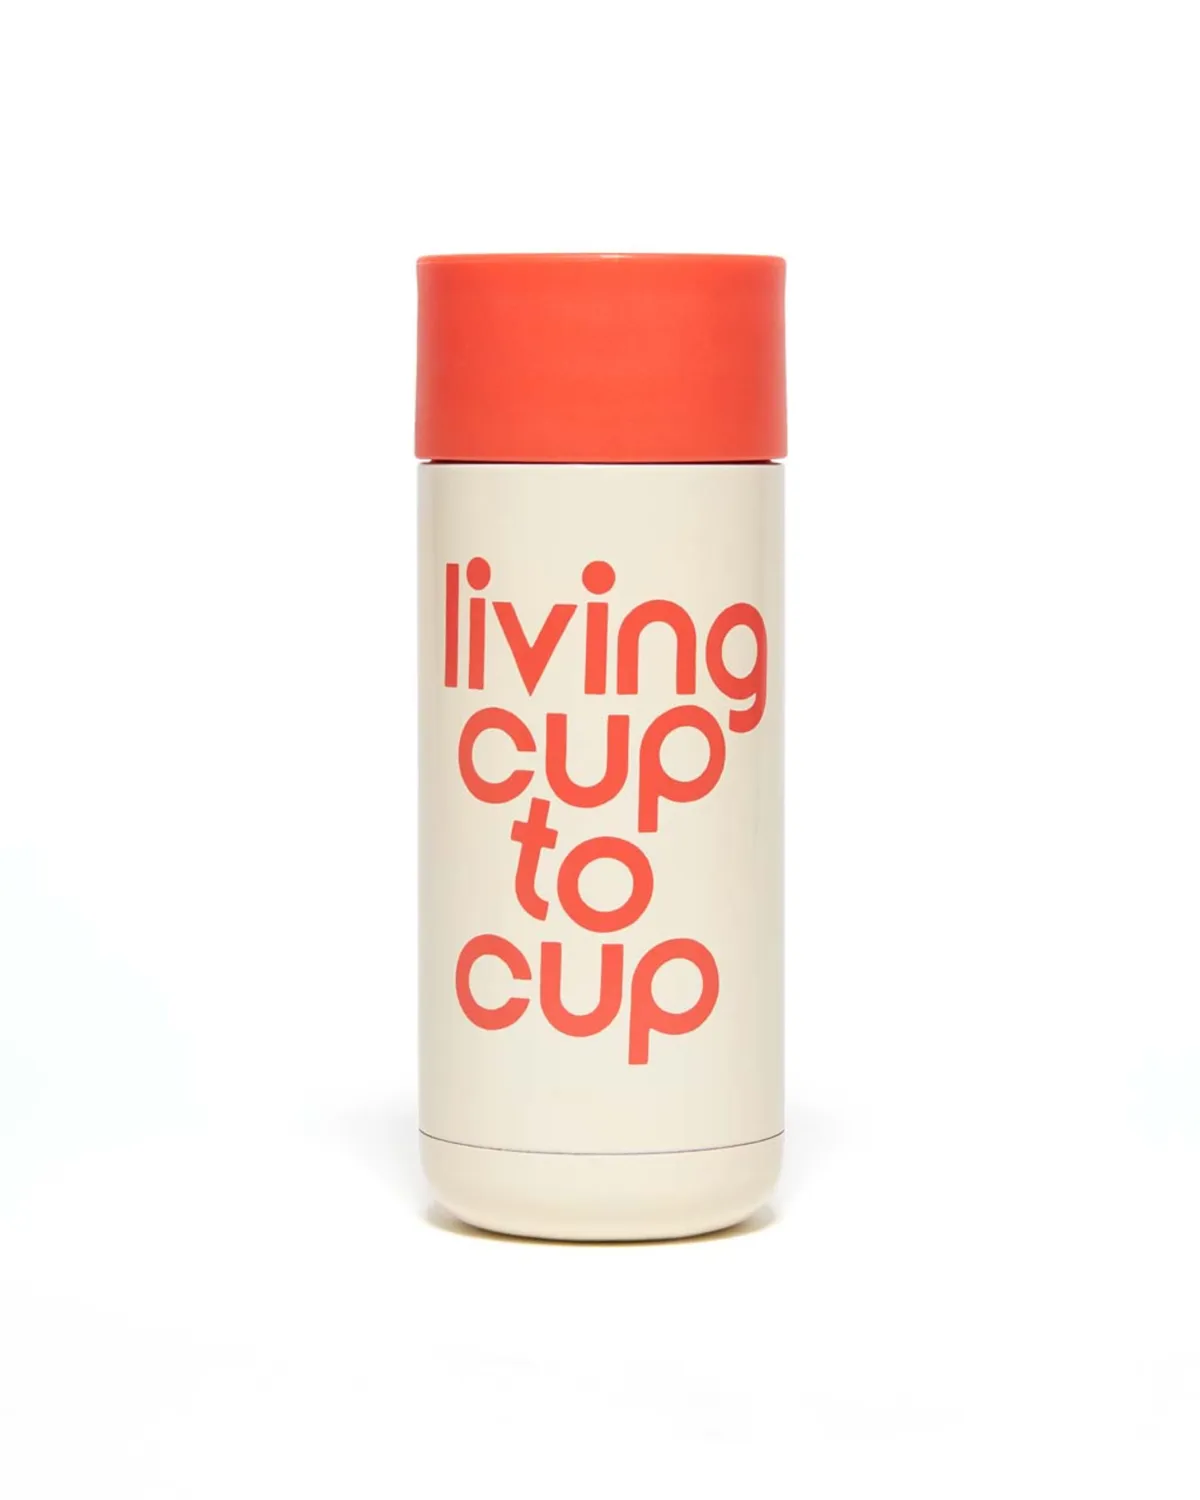 Stainless steel travel cup - living cup to cup